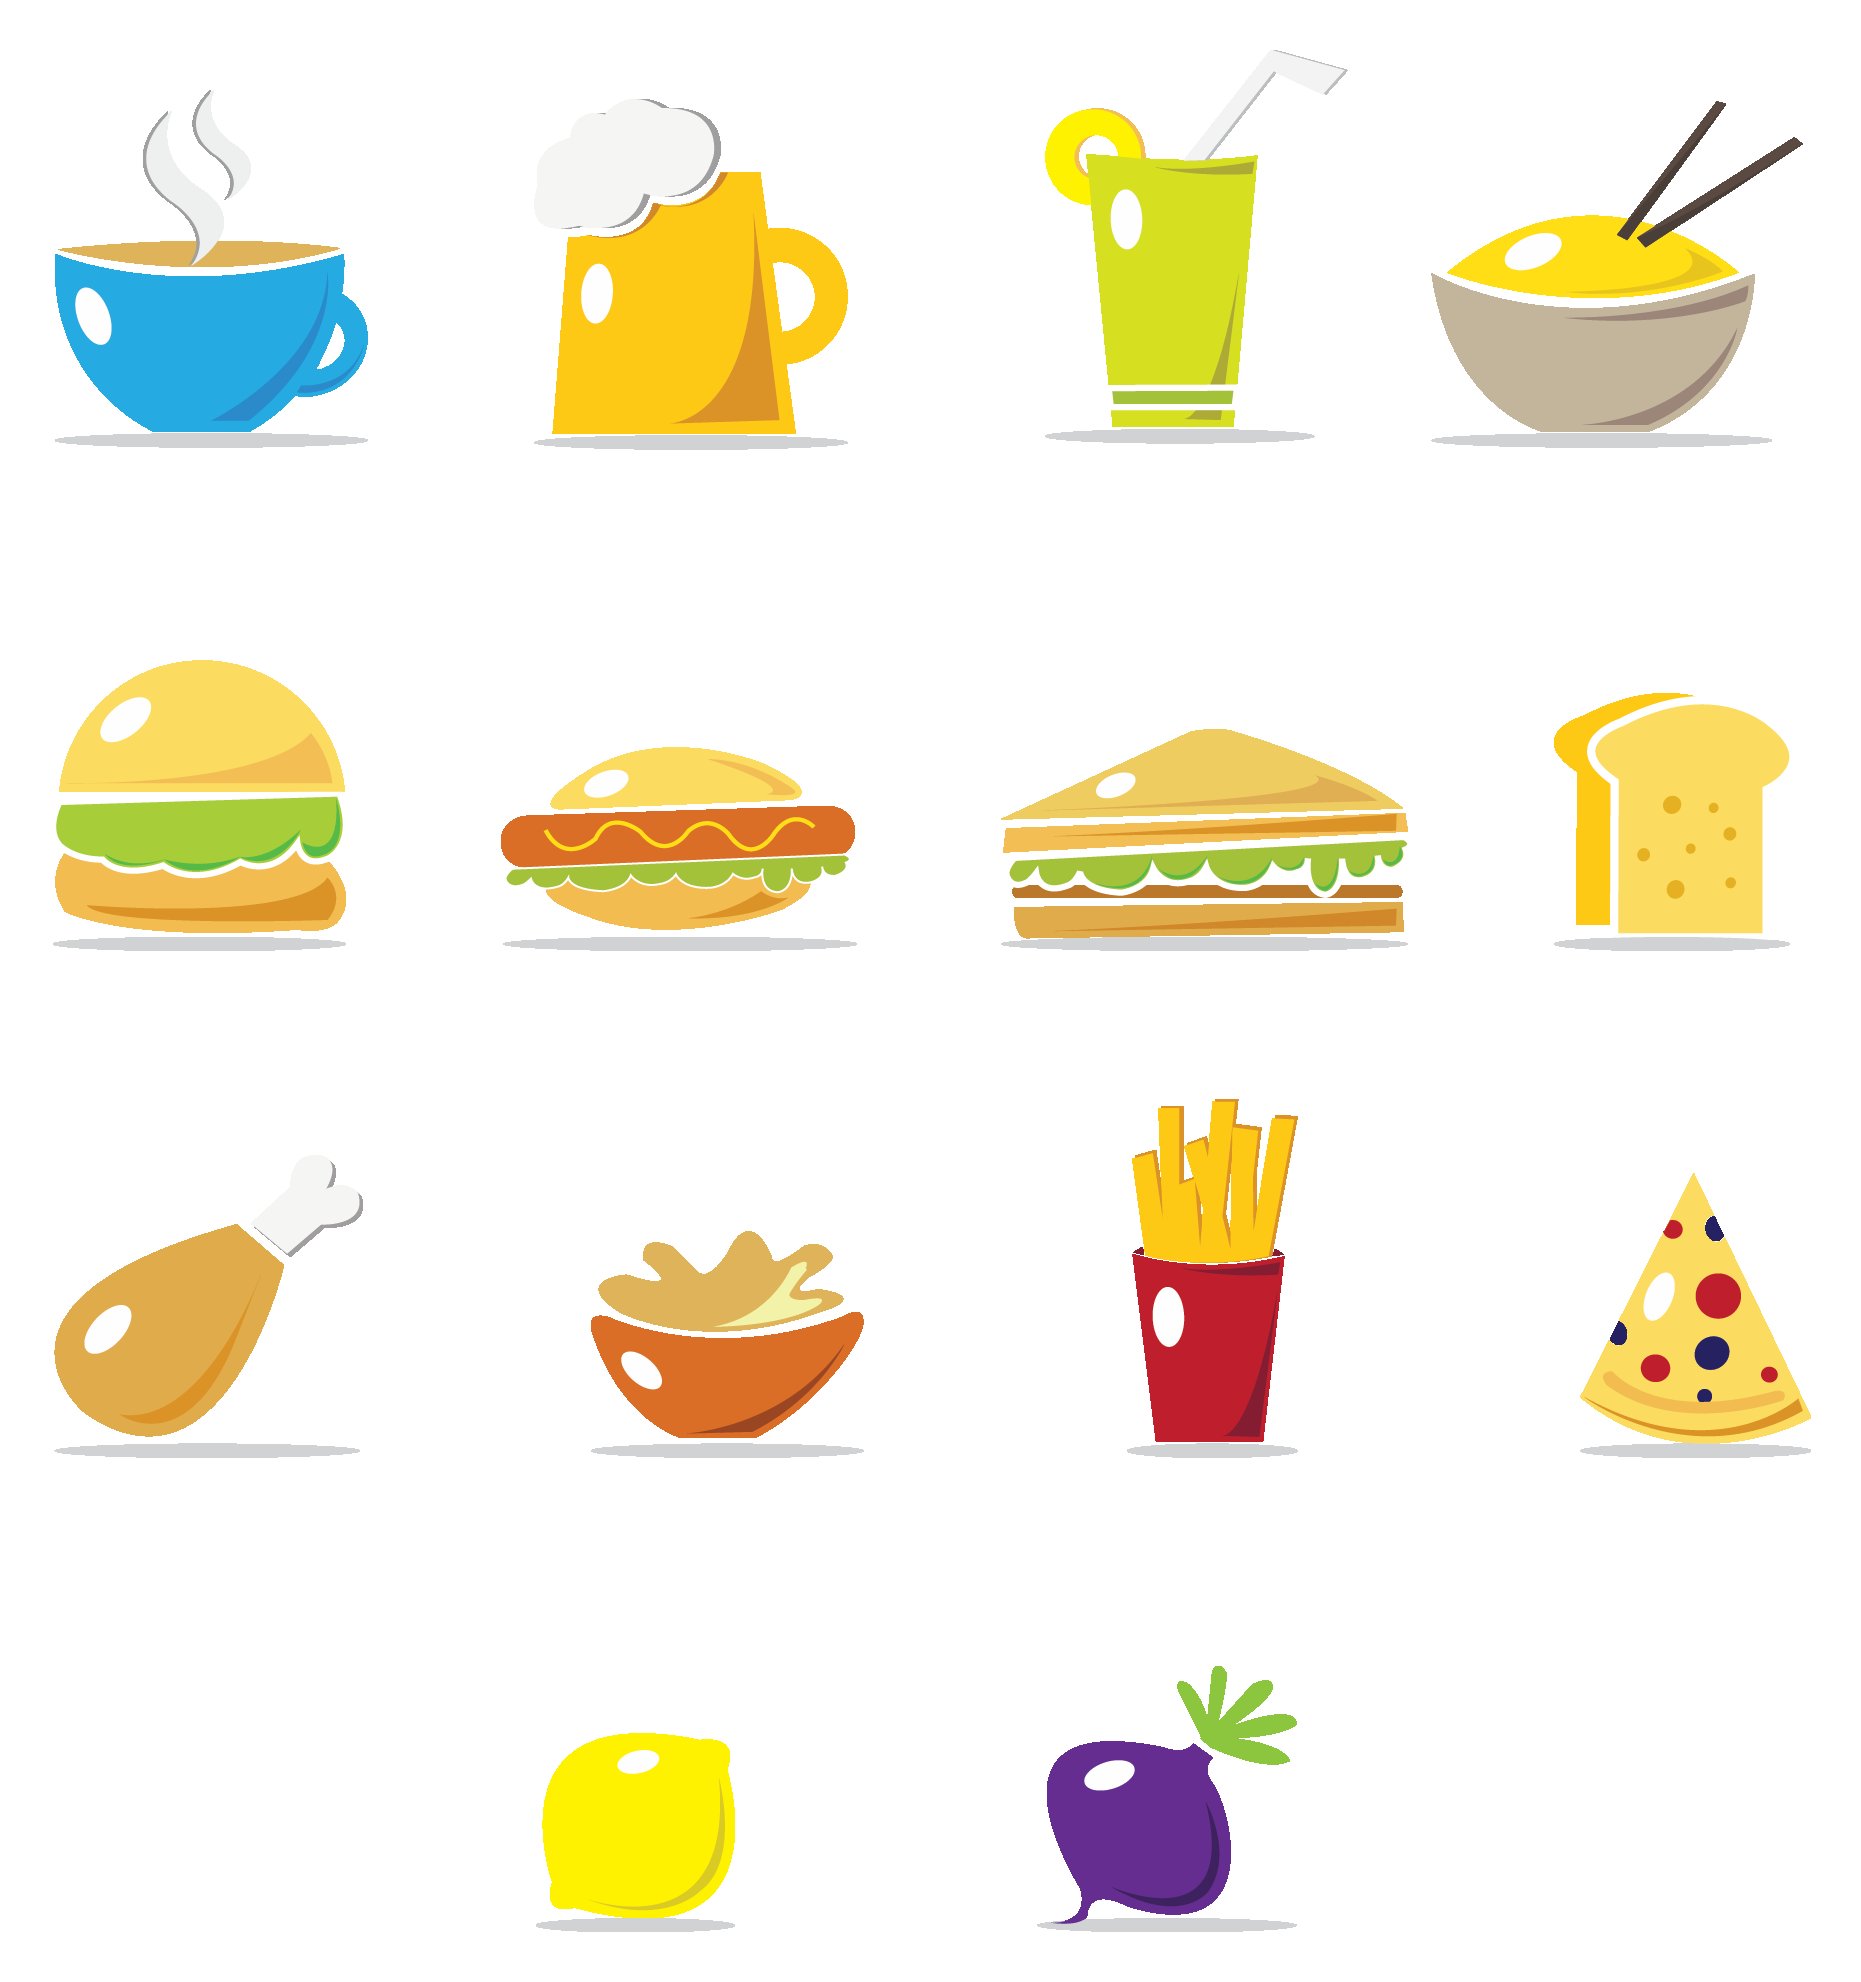 Spring Icons - Restaurant Set cover image.